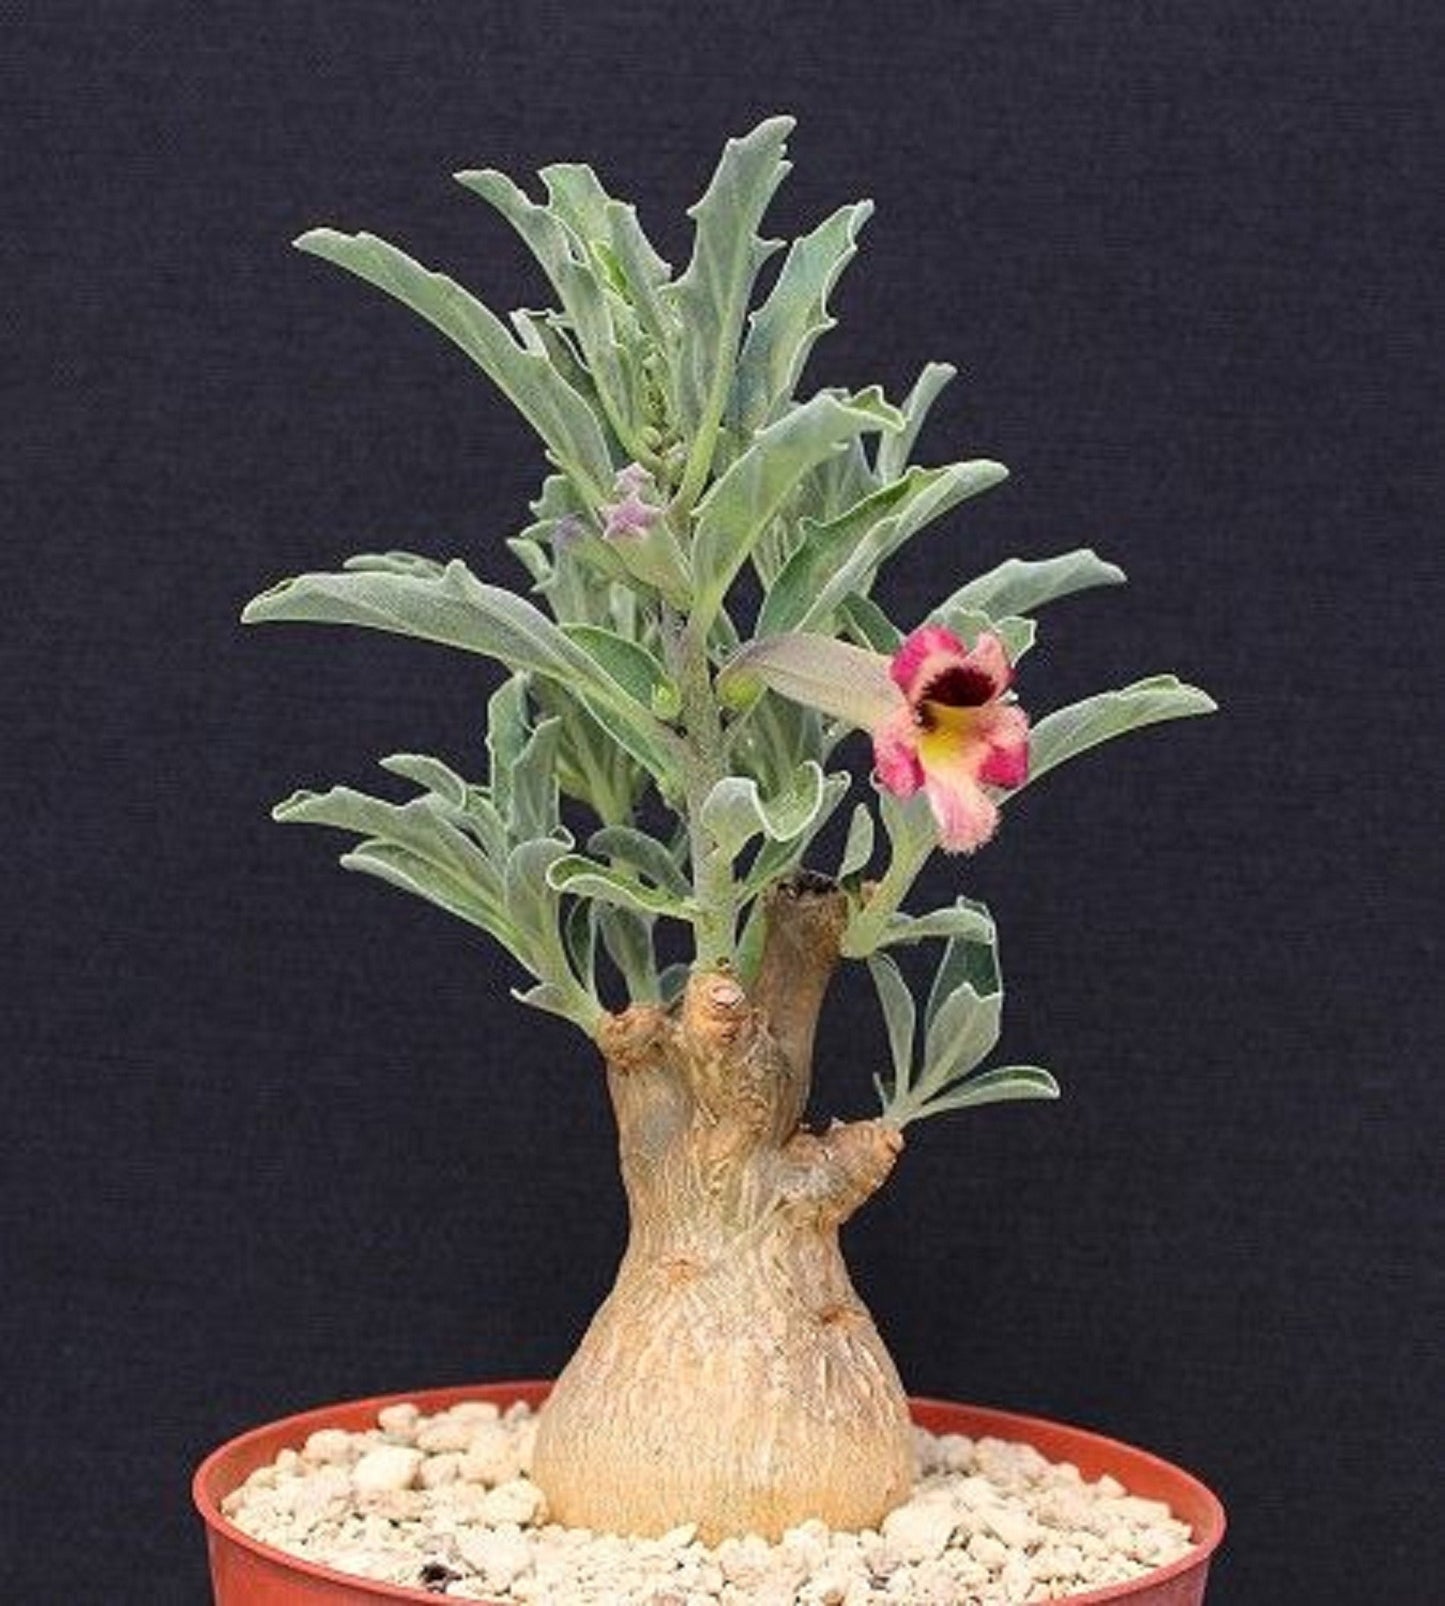 Pterodiscus Ngamicus * Stunning Caudex Succulent * Extremely Rare * 3 Large Seeds *